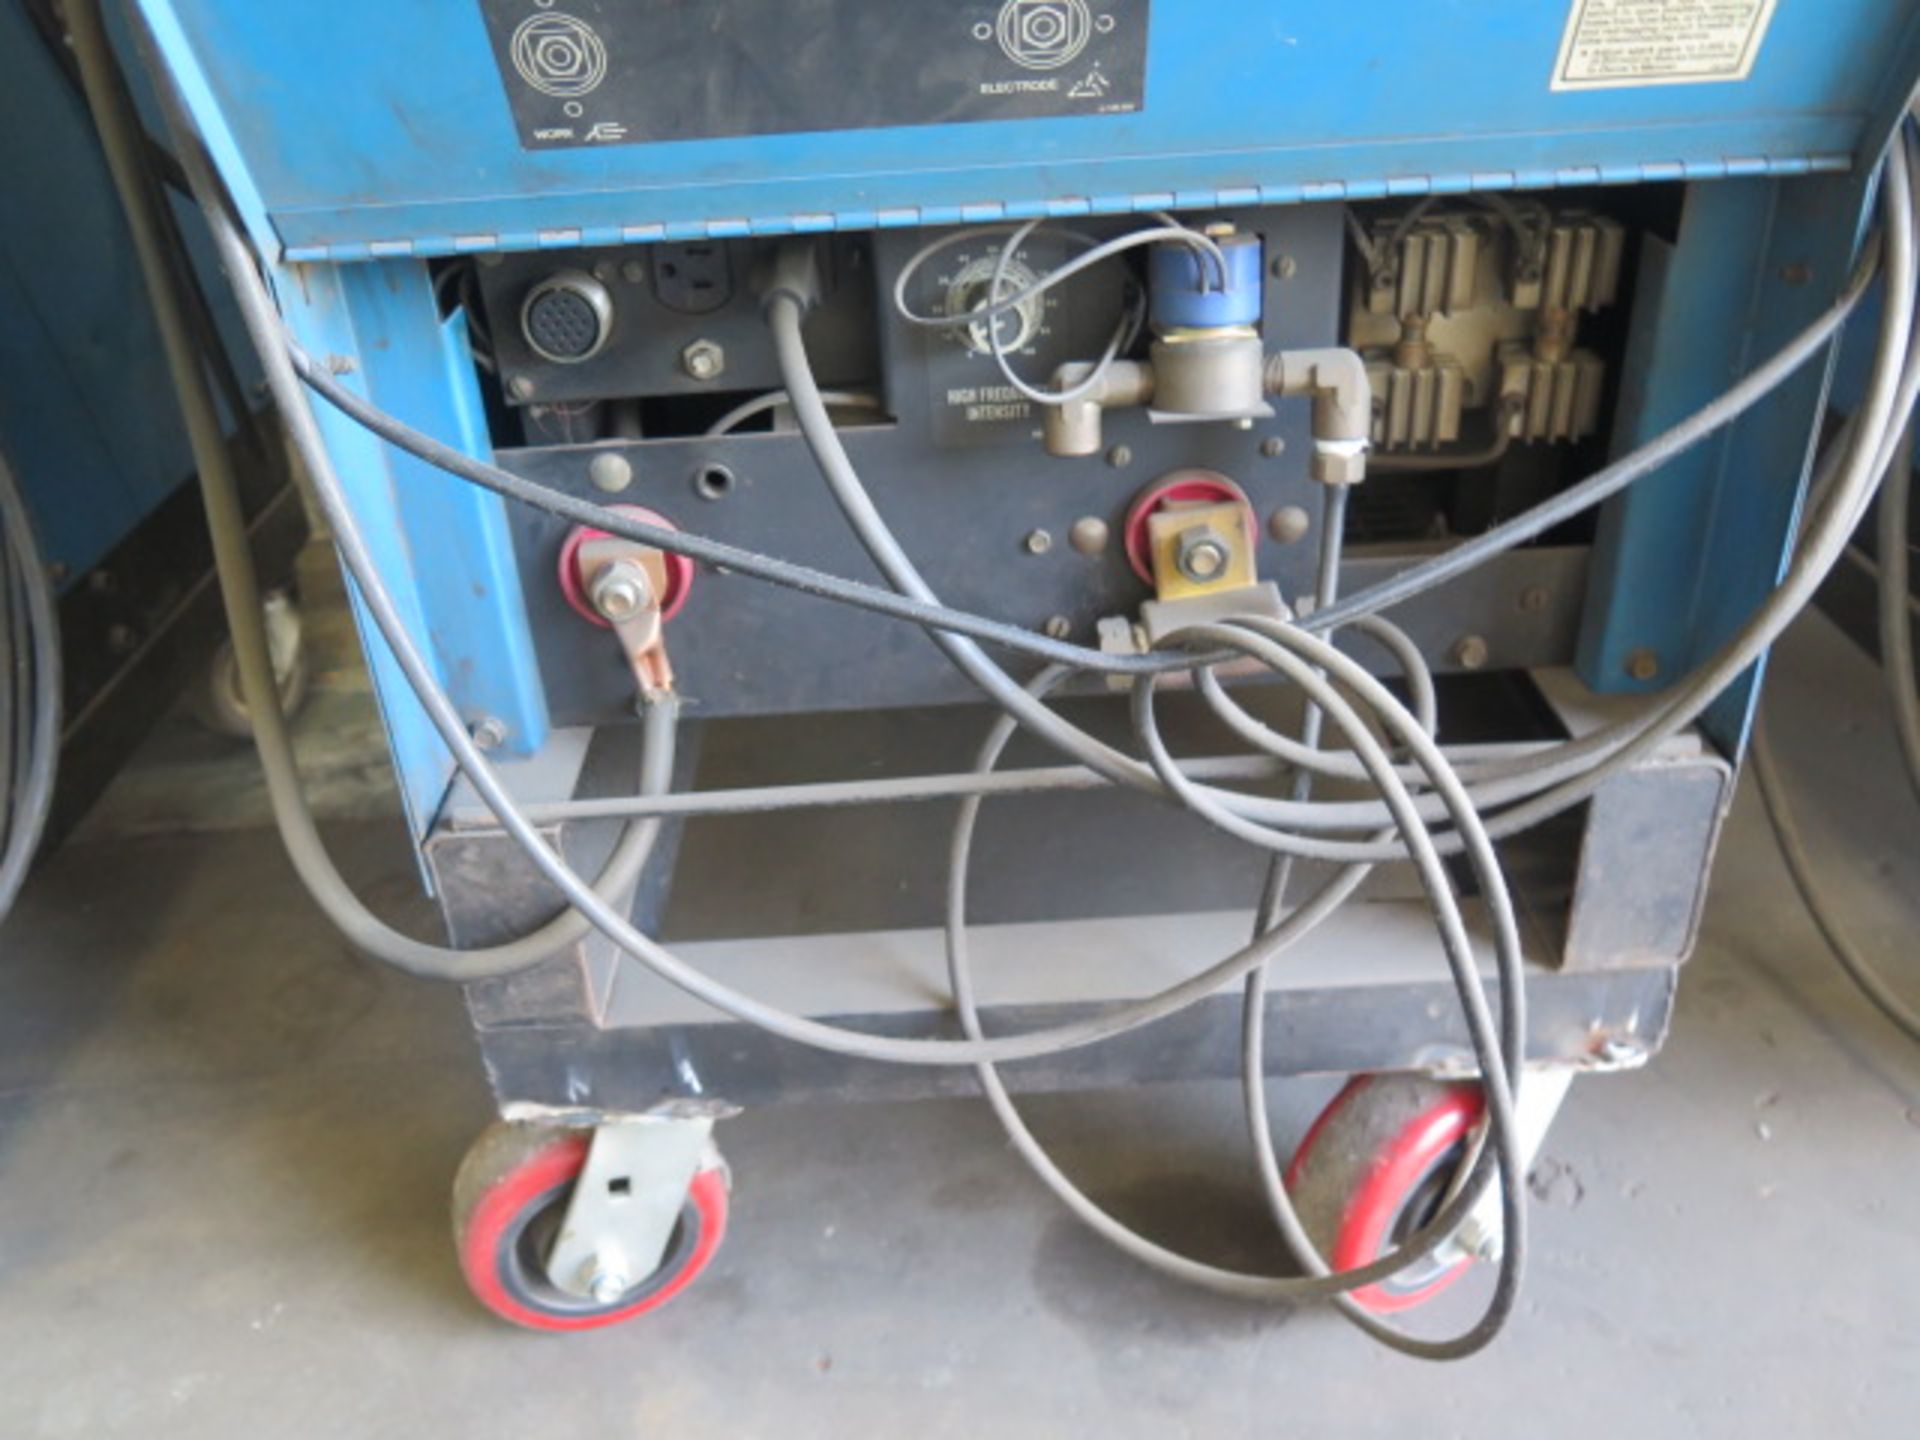 Miller Syncrowave 250 CC-AC/DC Arc Welding Power Source s/n KA792484 w/ Miller Cooler SOLD AS IS - Image 4 of 7